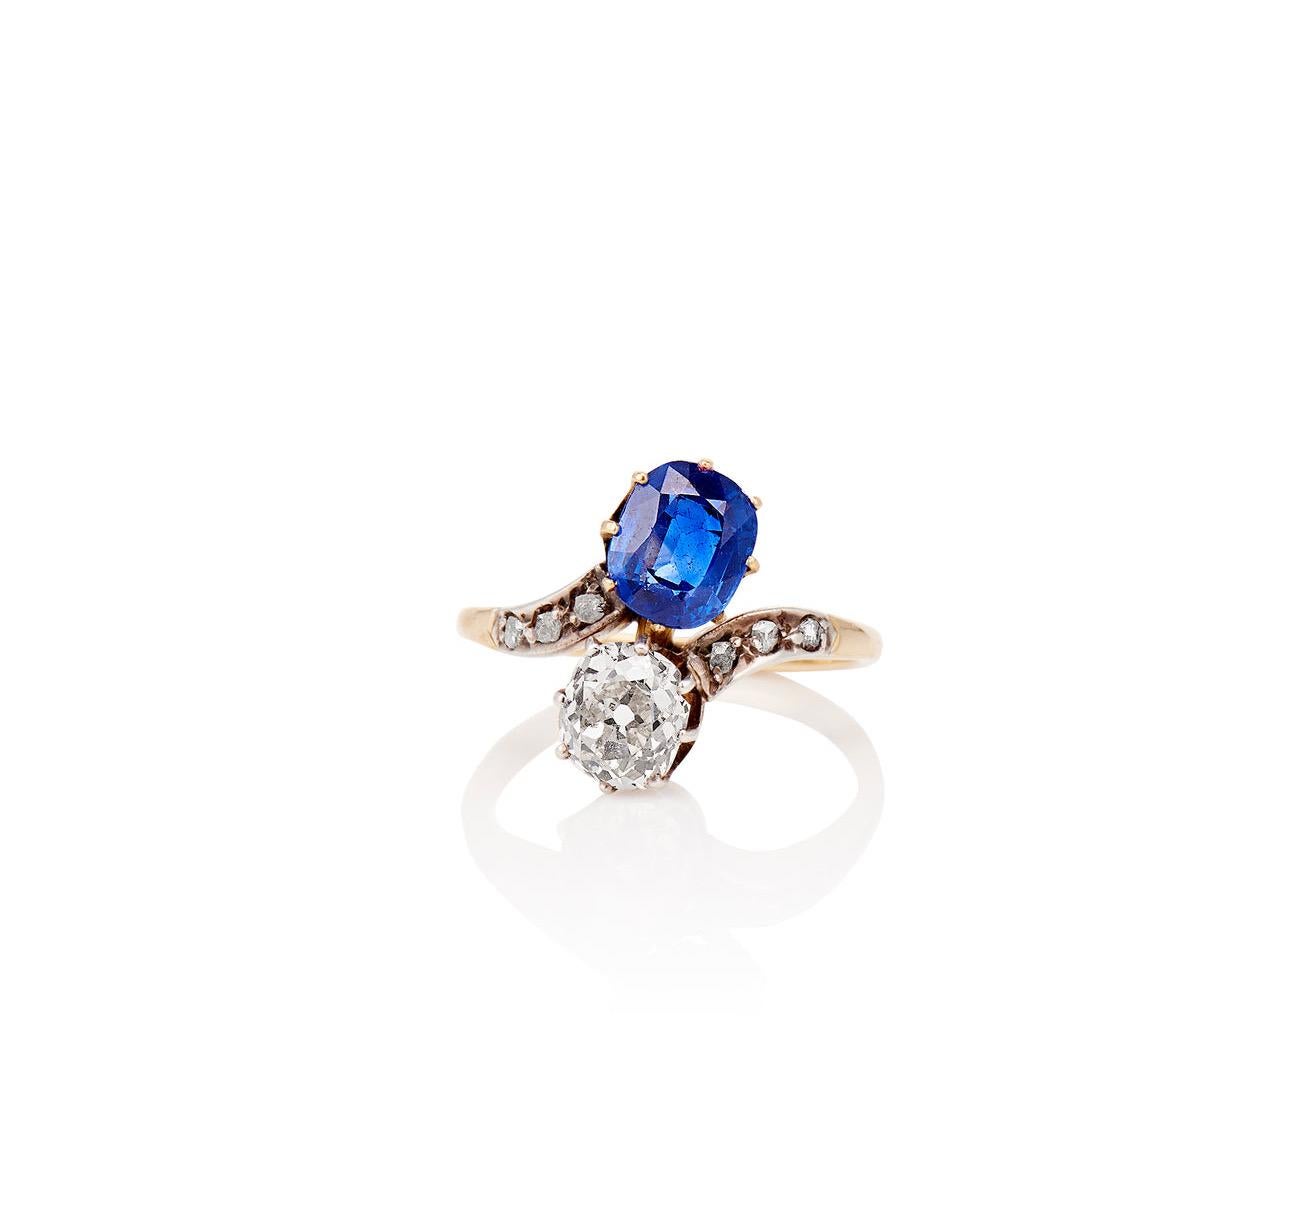 Edwardian Sapphire and Diamond Toi et Moi Ring - AGL In Good Condition For Sale In Hummelstown, PA